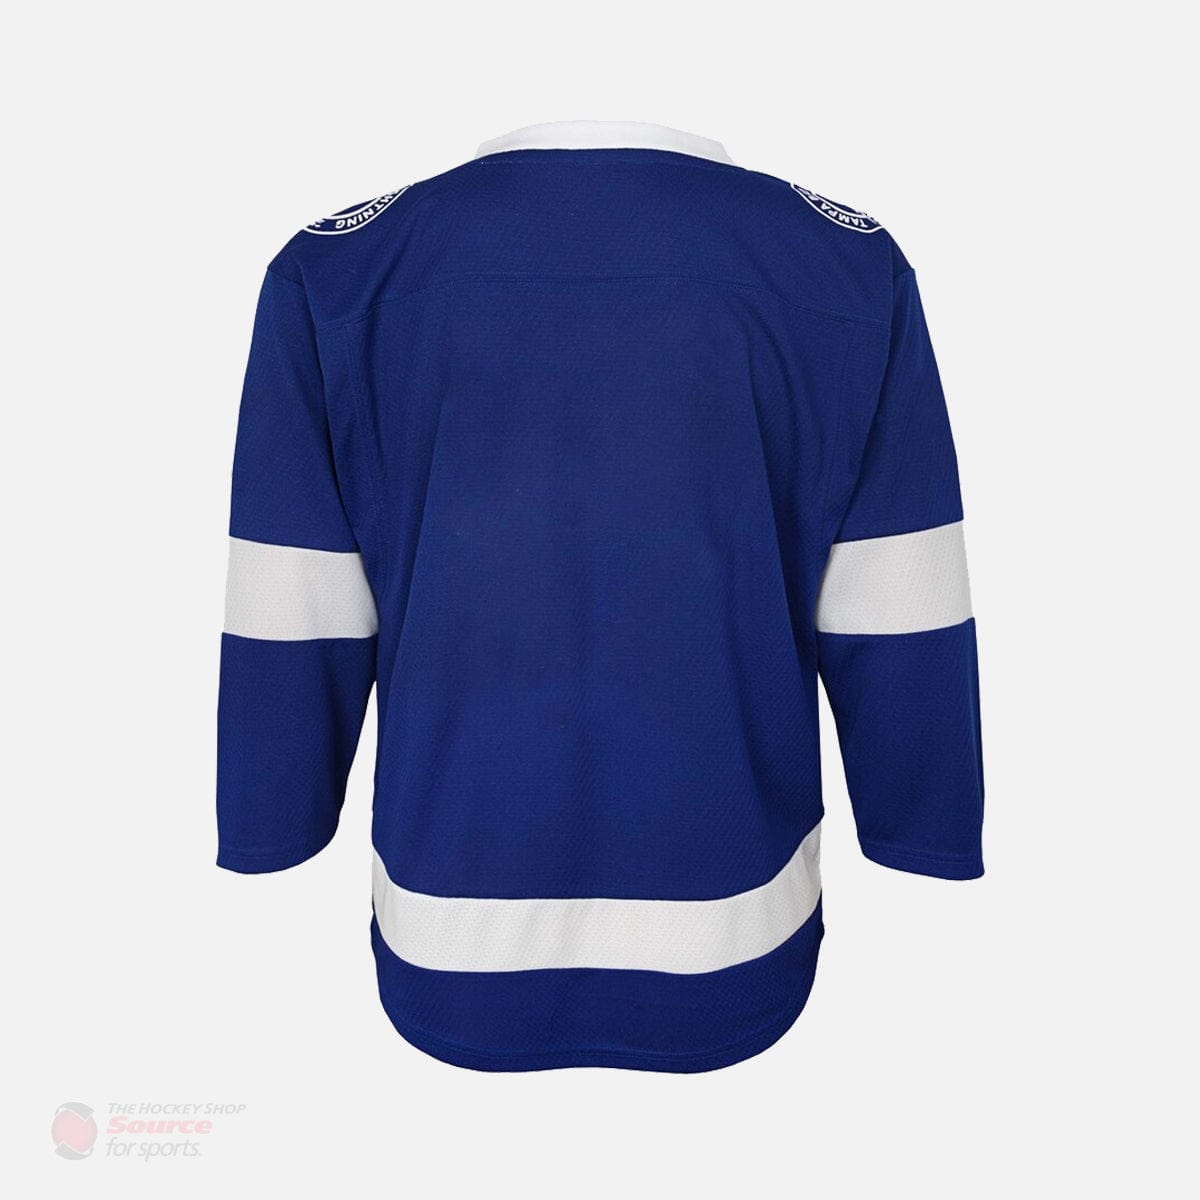 Tampa Bay Lightning Home Outer Stuff Replica Toddler Jersey